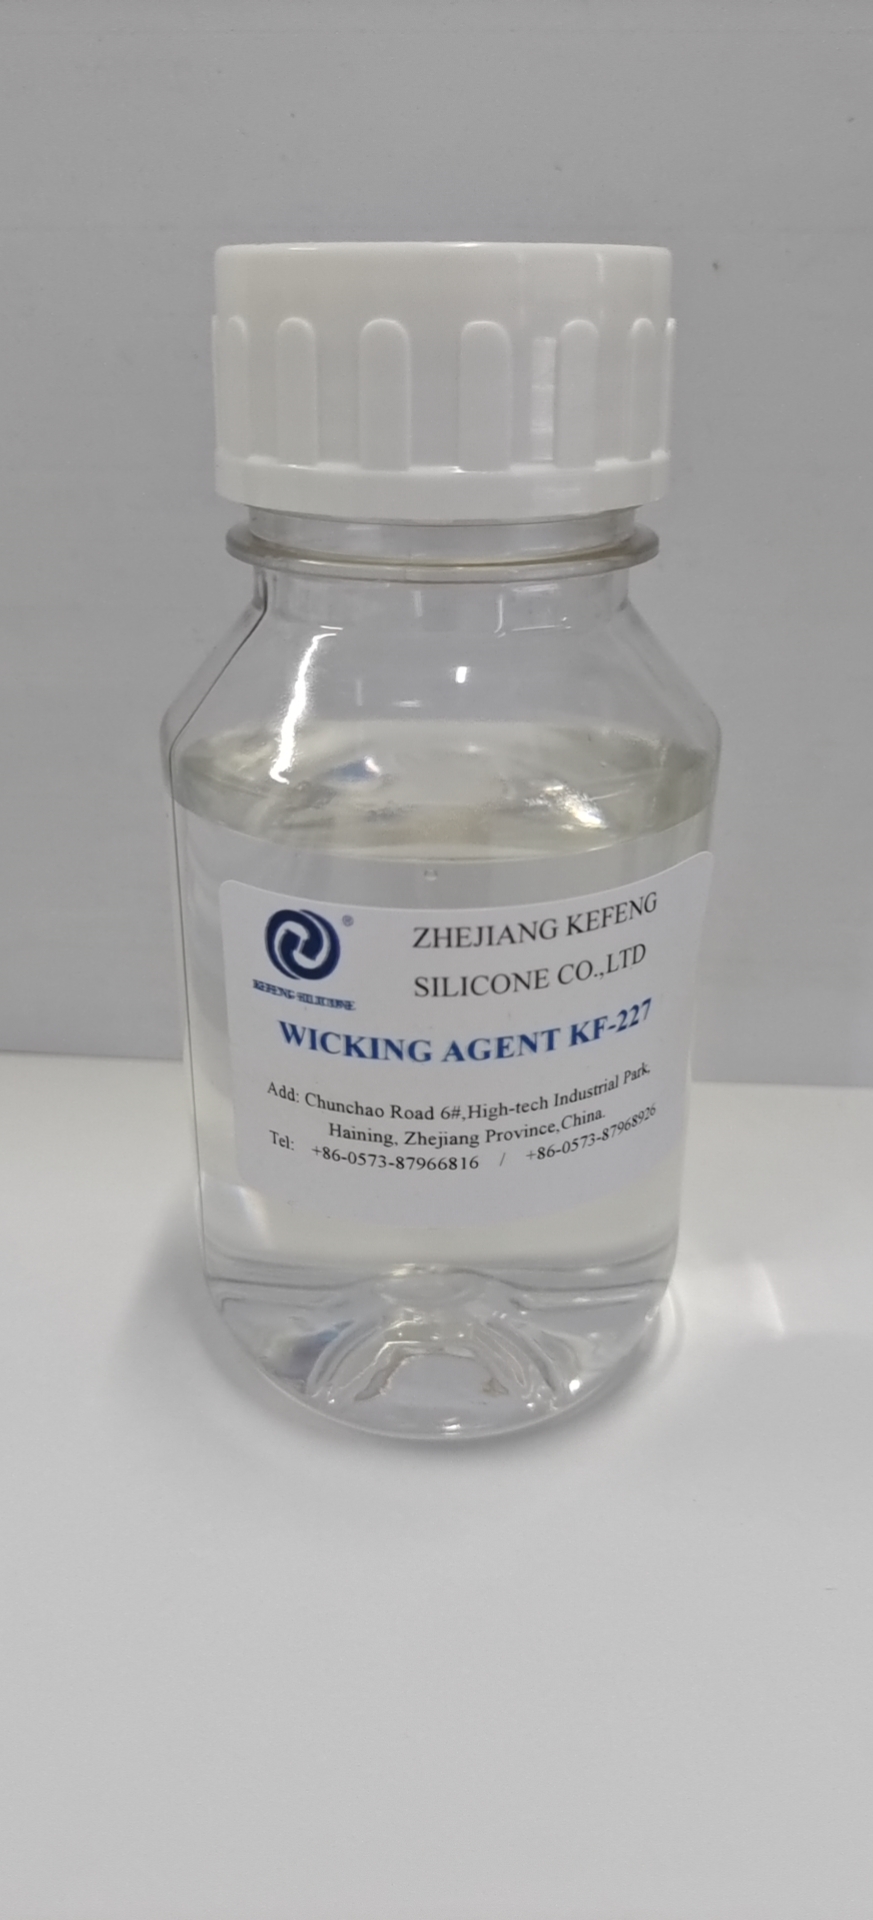 Quick-drying and Easy Decontamination Wicking Agent KF-227